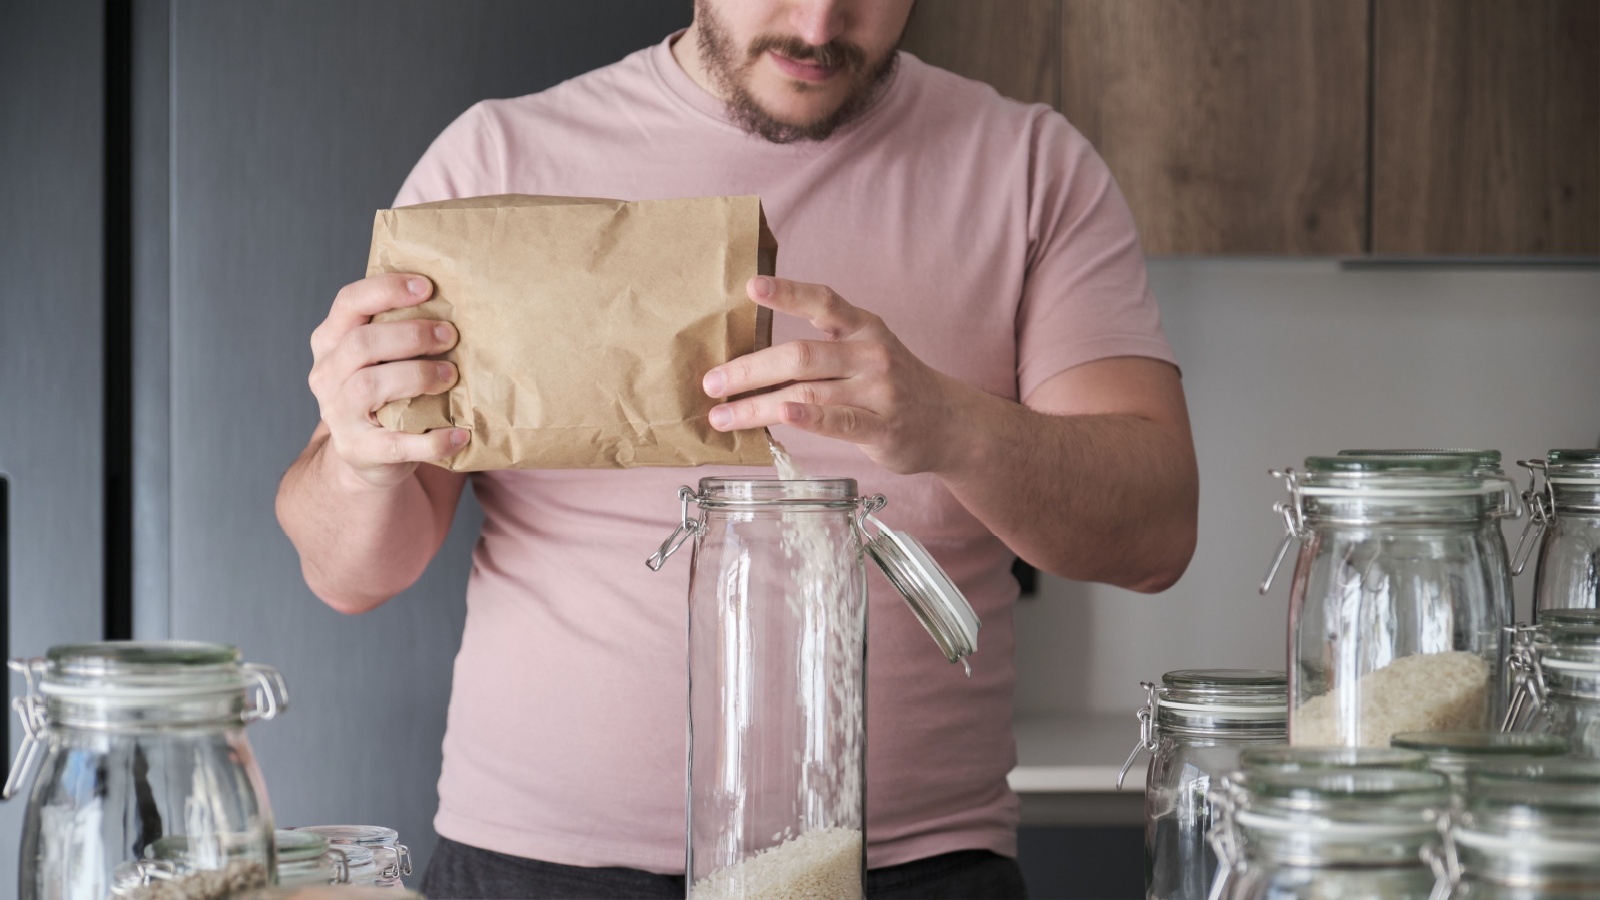 man filling up a jar with round grain rice from a paper bag. Food in bulk delivery.